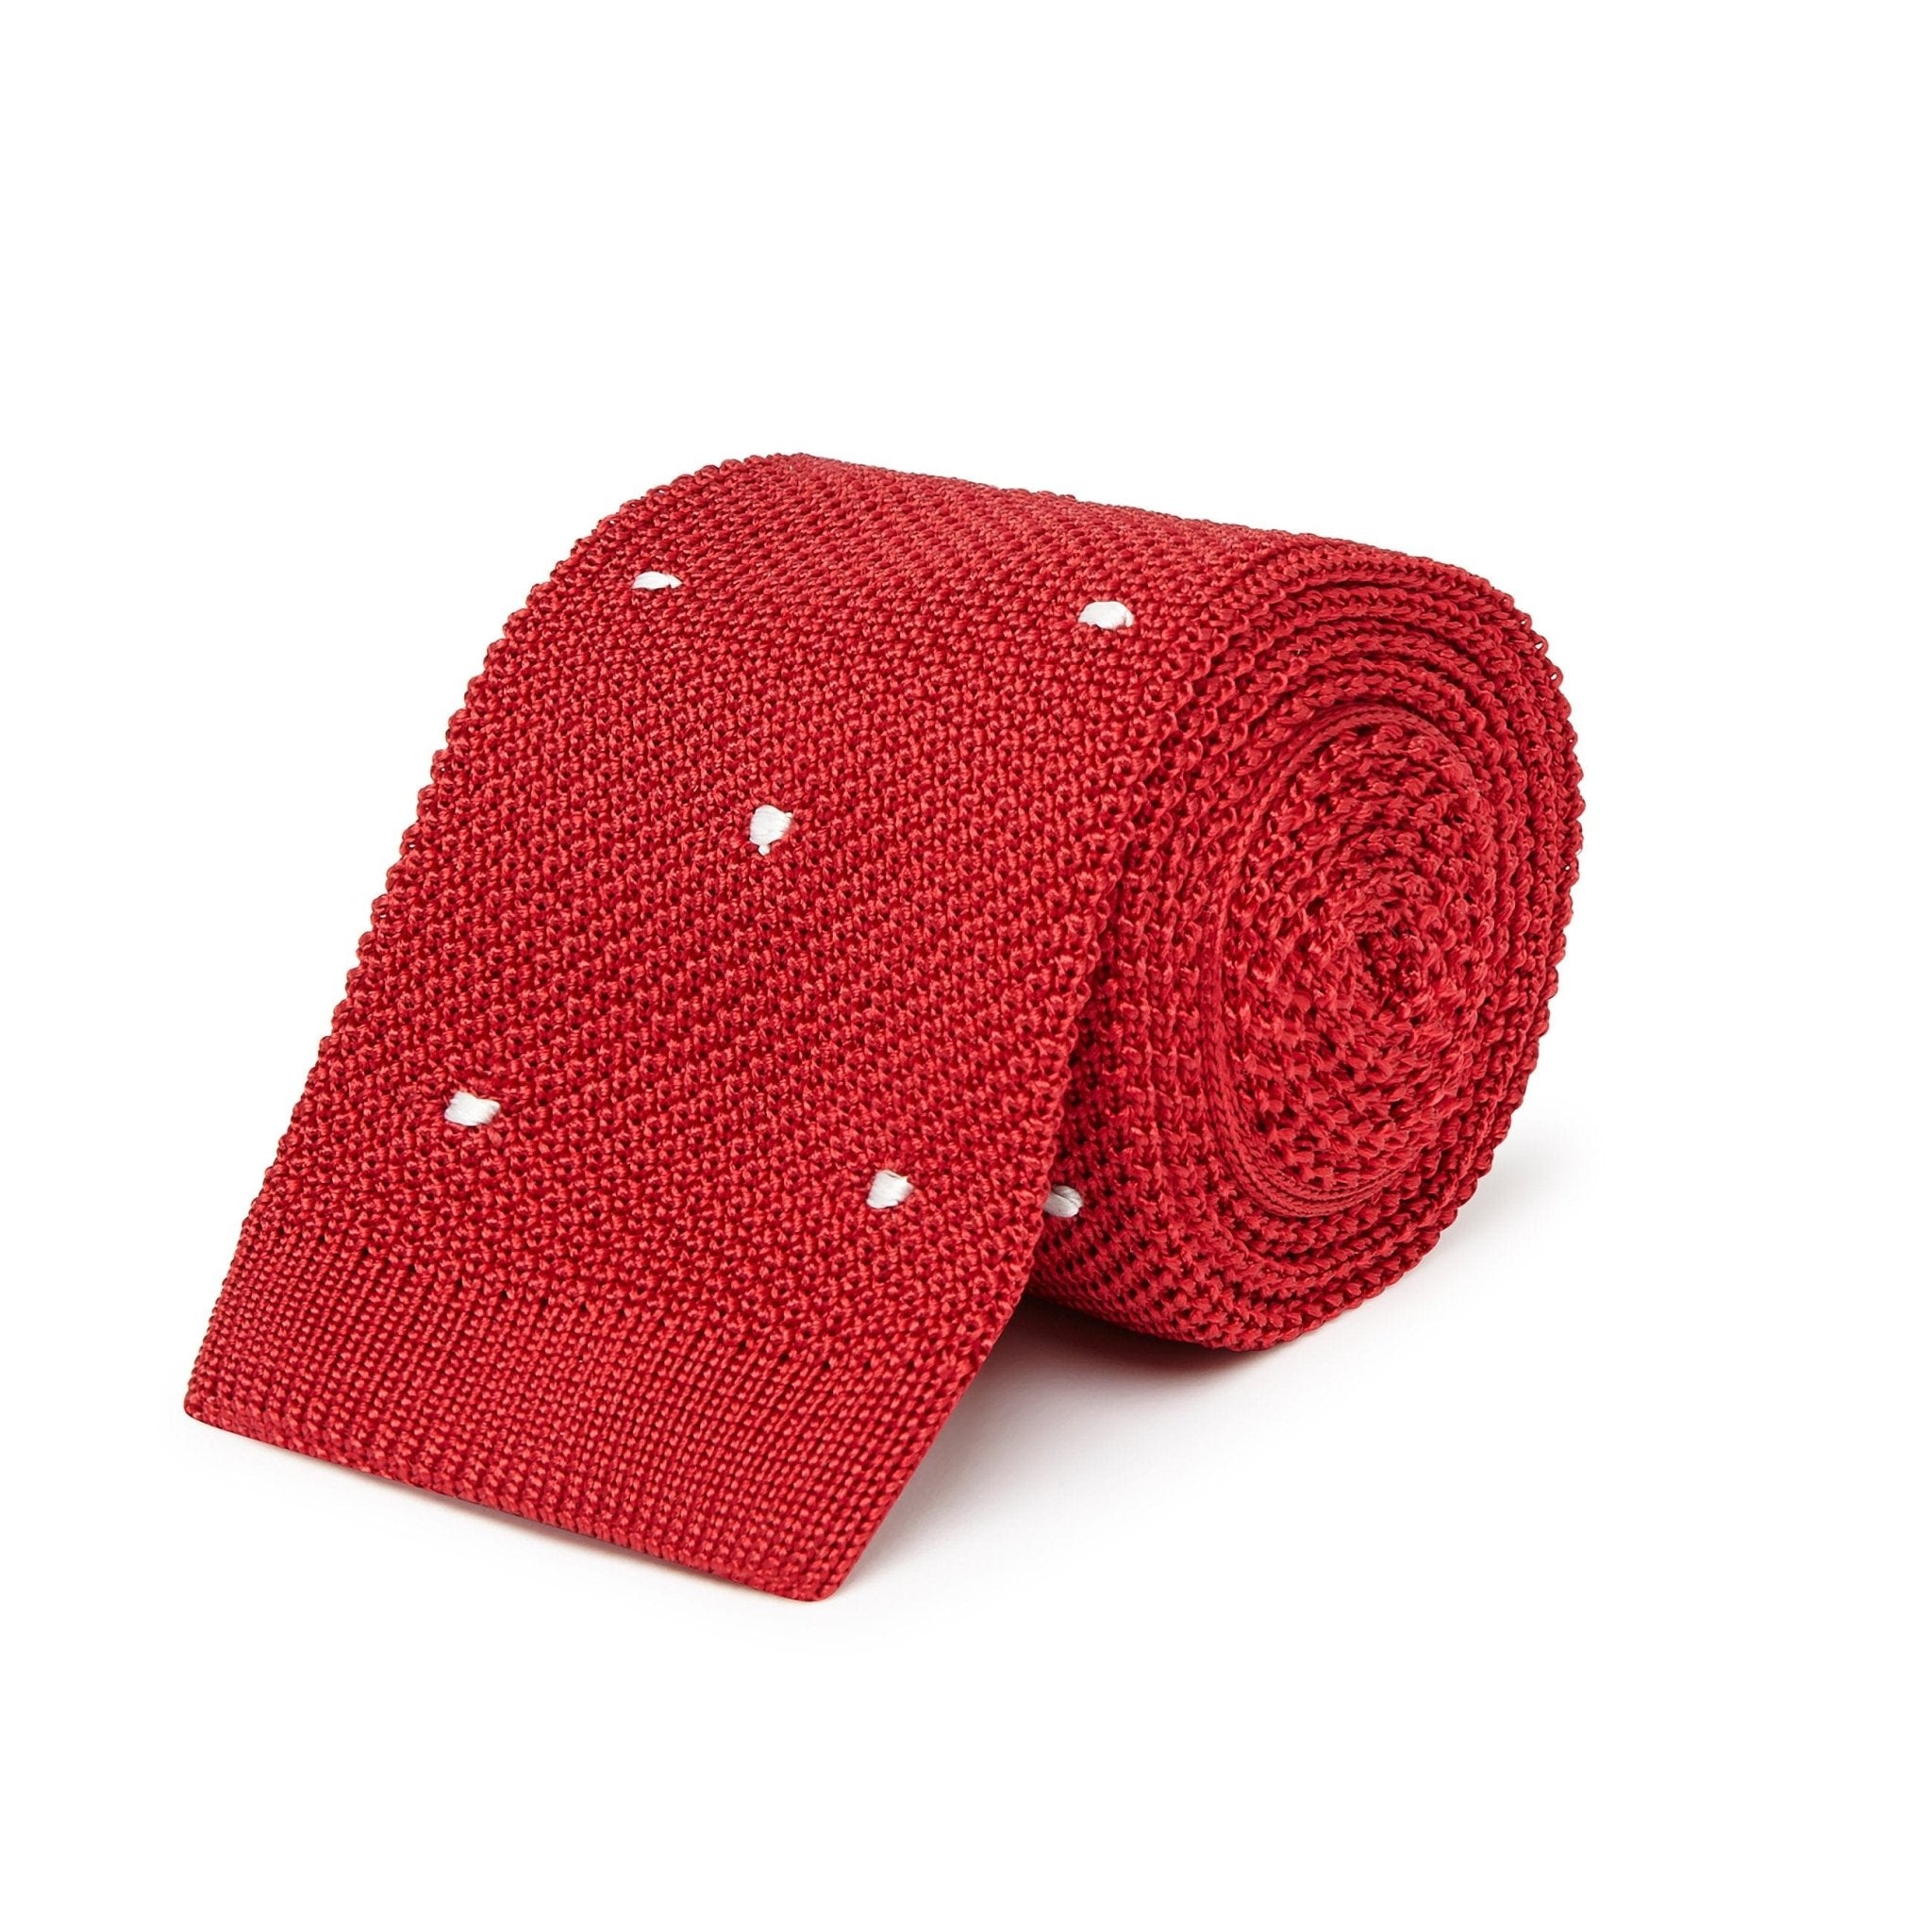 Red Knitted Silk Tie with White Spots